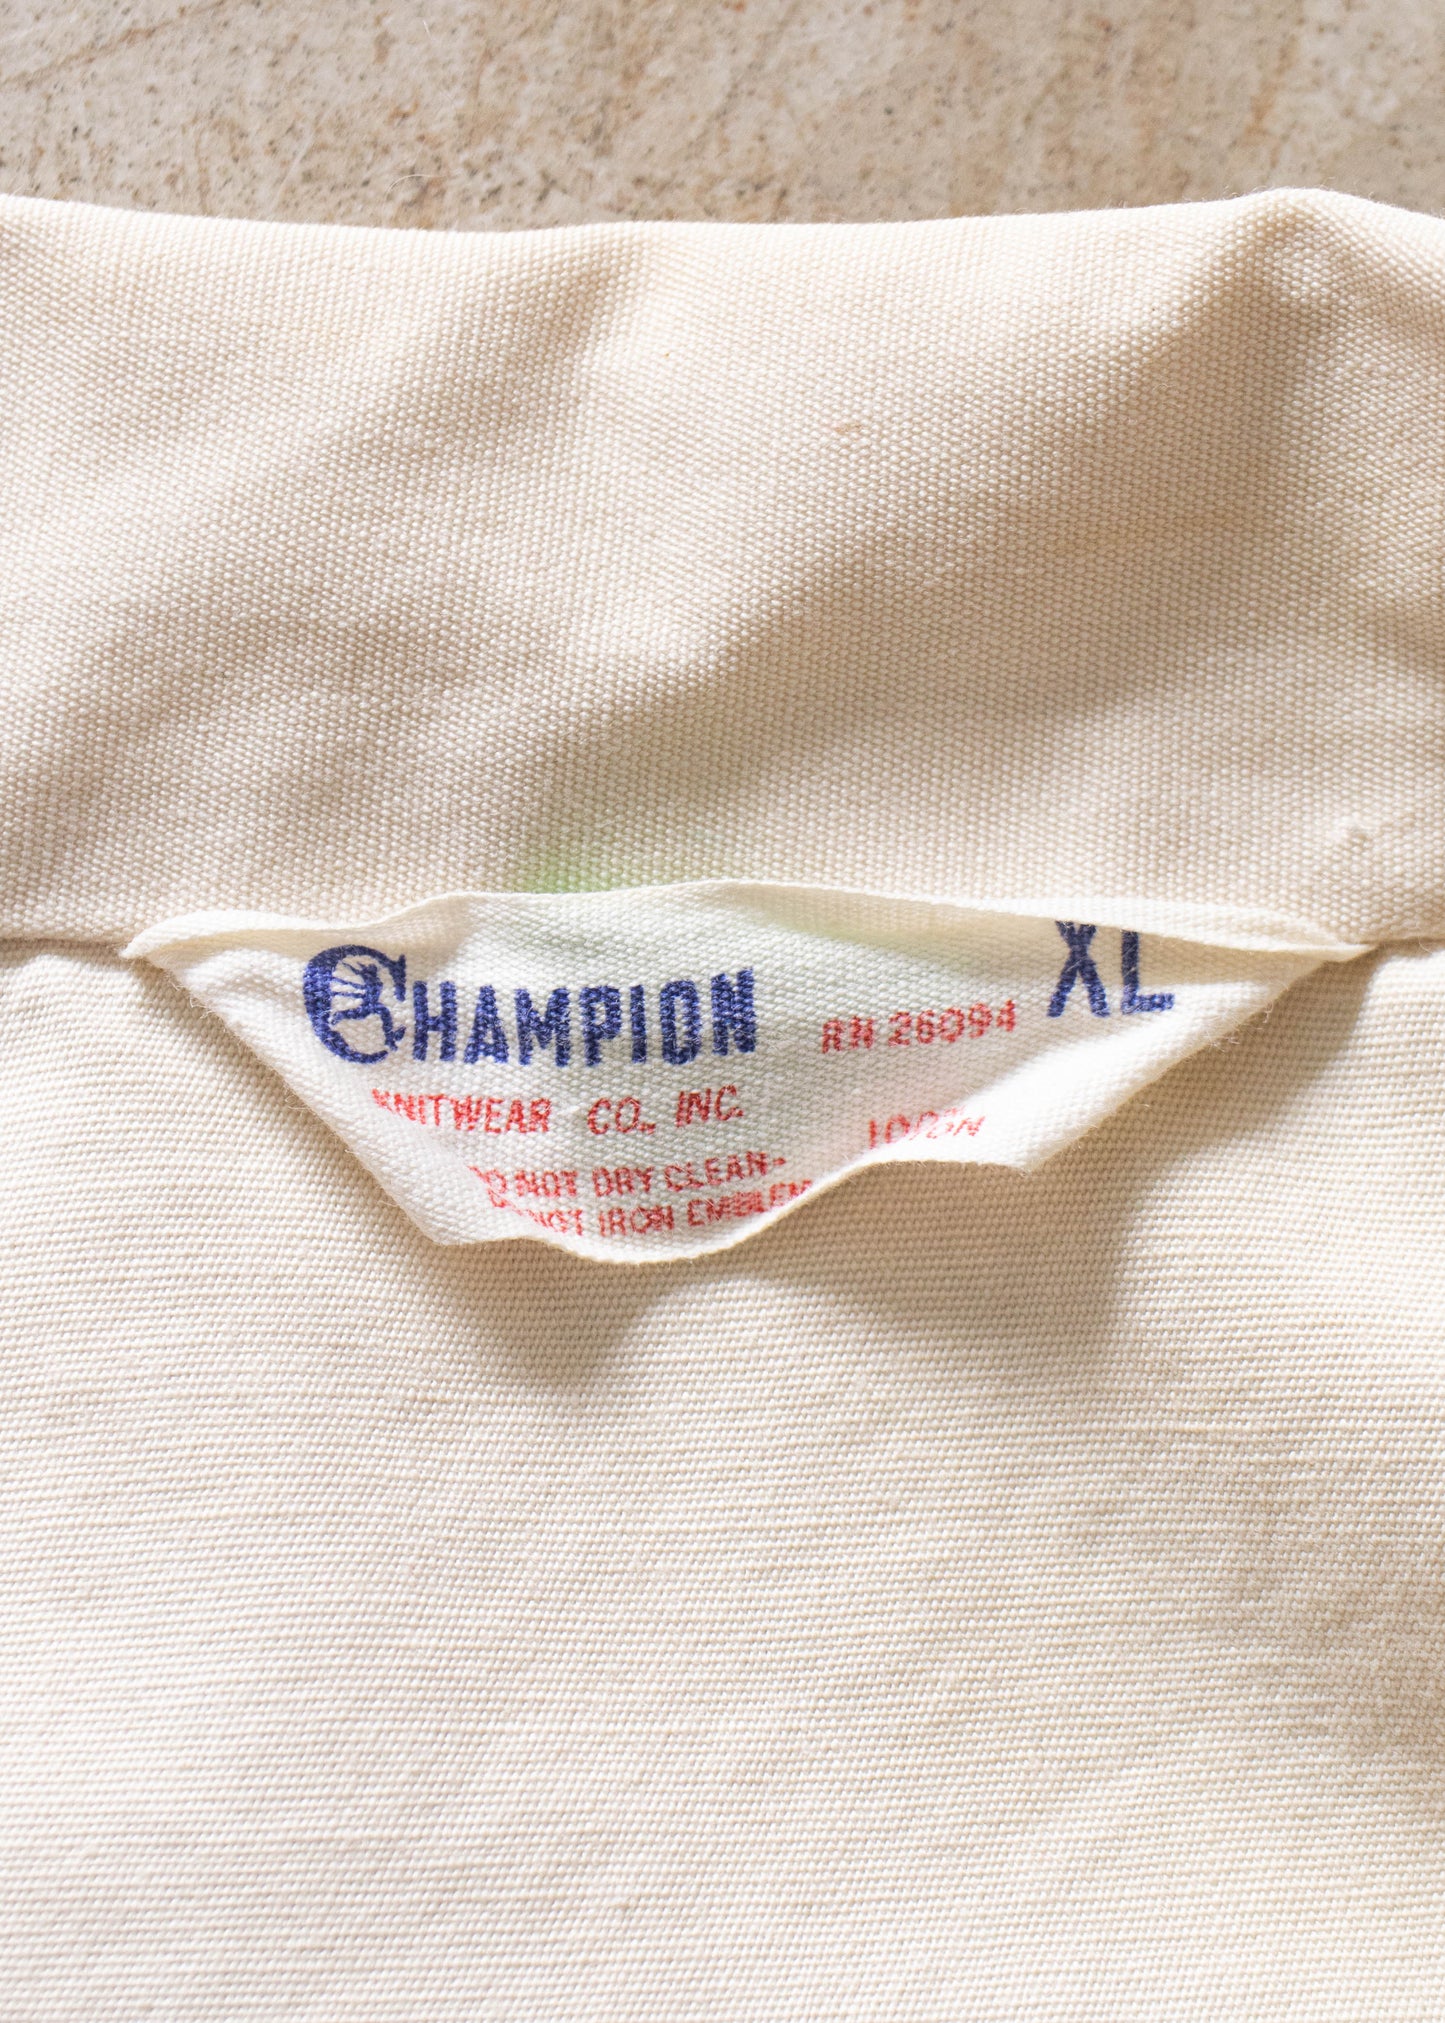 1960s Champion Butler High Track Jacket Size L/XL